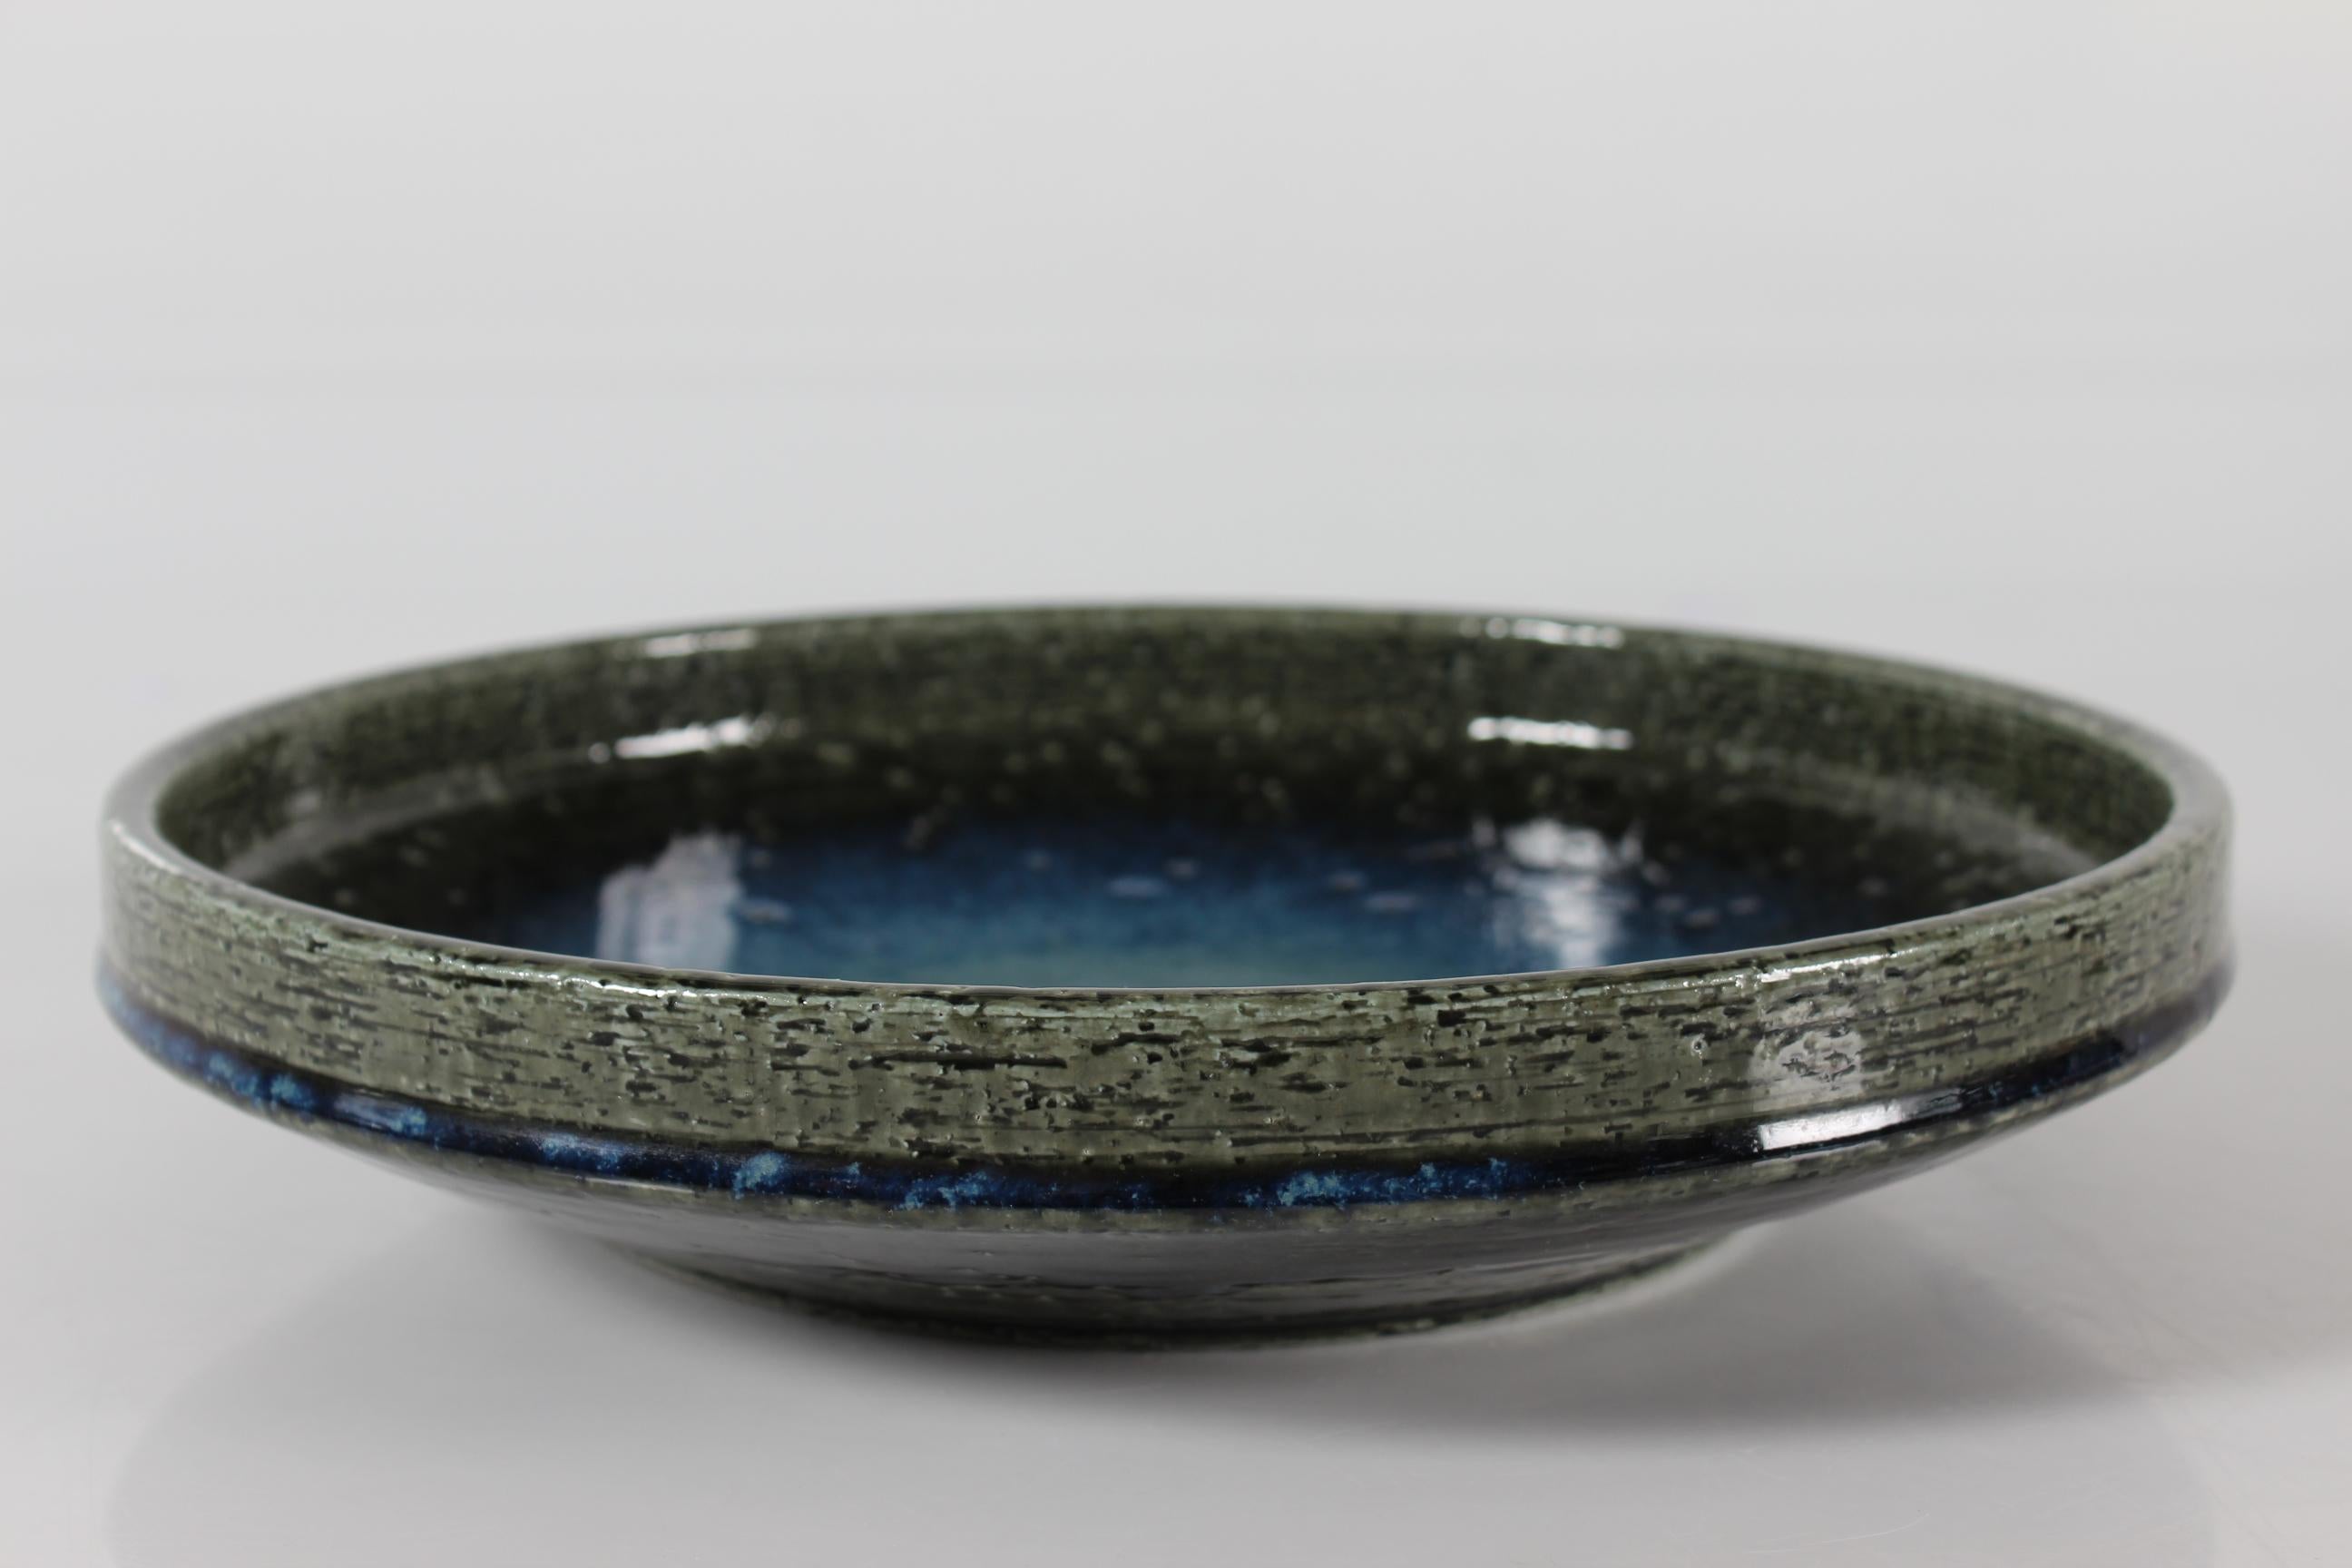 Large low ceramic bowl by Annelise and Per Linnemann-Schmidt for Palshus, Denmark. Made in the 1960s.
It is made with chamotte clay which gives a rough and vivid surface. The glossy glaze is a deep blue and moss green.

The bowl is fully marked